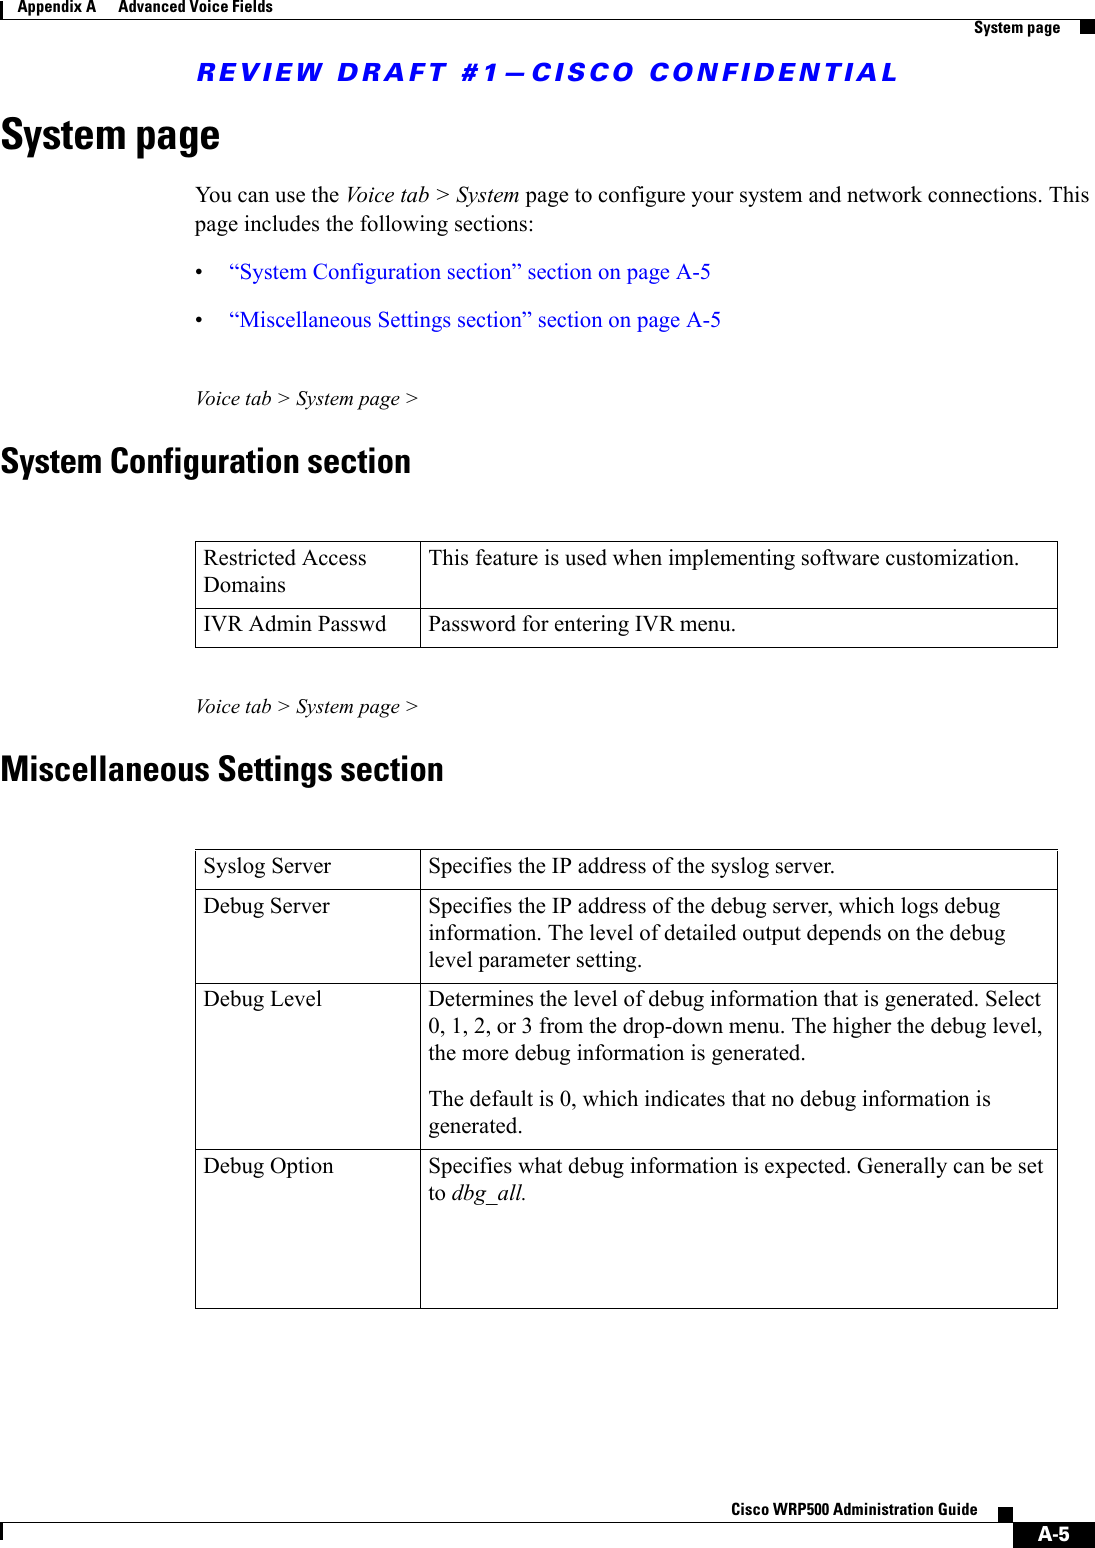 REVIEW DRAFT #1—CISCO CONFIDENTIALA-5Cisco WRP500 Administration Guide Appendix A      Advanced Voice Fields  System pageSystem pageYou can use the Voice tab &gt; System page to configure your system and network connections. This page includes the following sections:•“System Configuration section” section on page A-5•“Miscellaneous Settings section” section on page A-5Voice tab &gt; System page &gt;System Configuration sectionVoice tab &gt; System page &gt;Miscellaneous Settings sectionRestricted Access Domains This feature is used when implementing software customization.IVR Admin Passwd Password for entering IVR menu.Syslog Server Specifies the IP address of the syslog server.Debug Server Specifies the IP address of the debug server, which logs debug information. The level of detailed output depends on the debug level parameter setting.Debug Level  Determines the level of debug information that is generated. Select 0, 1, 2, or 3 from the drop-down menu. The higher the debug level, the more debug information is generated.The default is 0, which indicates that no debug information is generated.Debug Option Specifies what debug information is expected. Generally can be set to dbg_all.